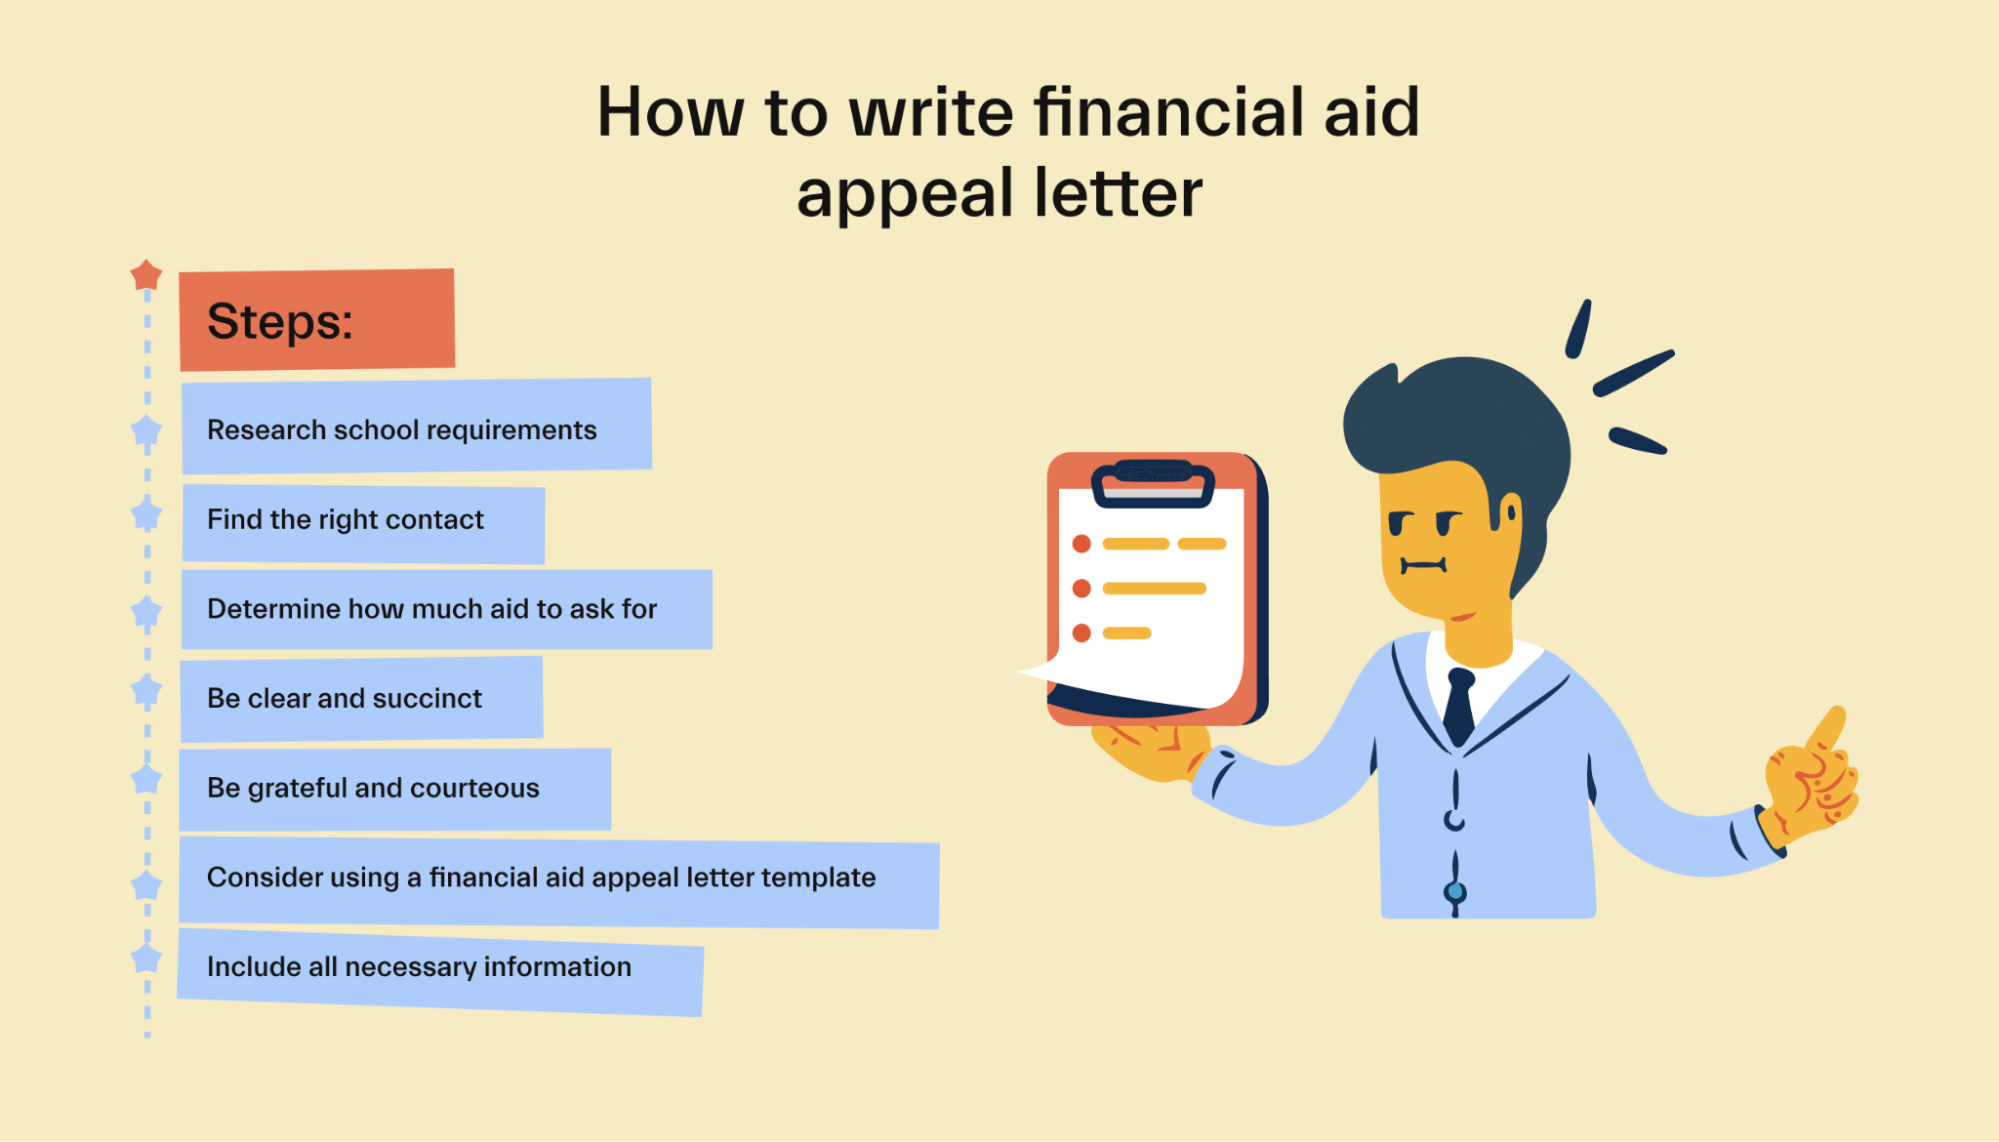 Steps to Writing a Financial Aid Appeal Letter